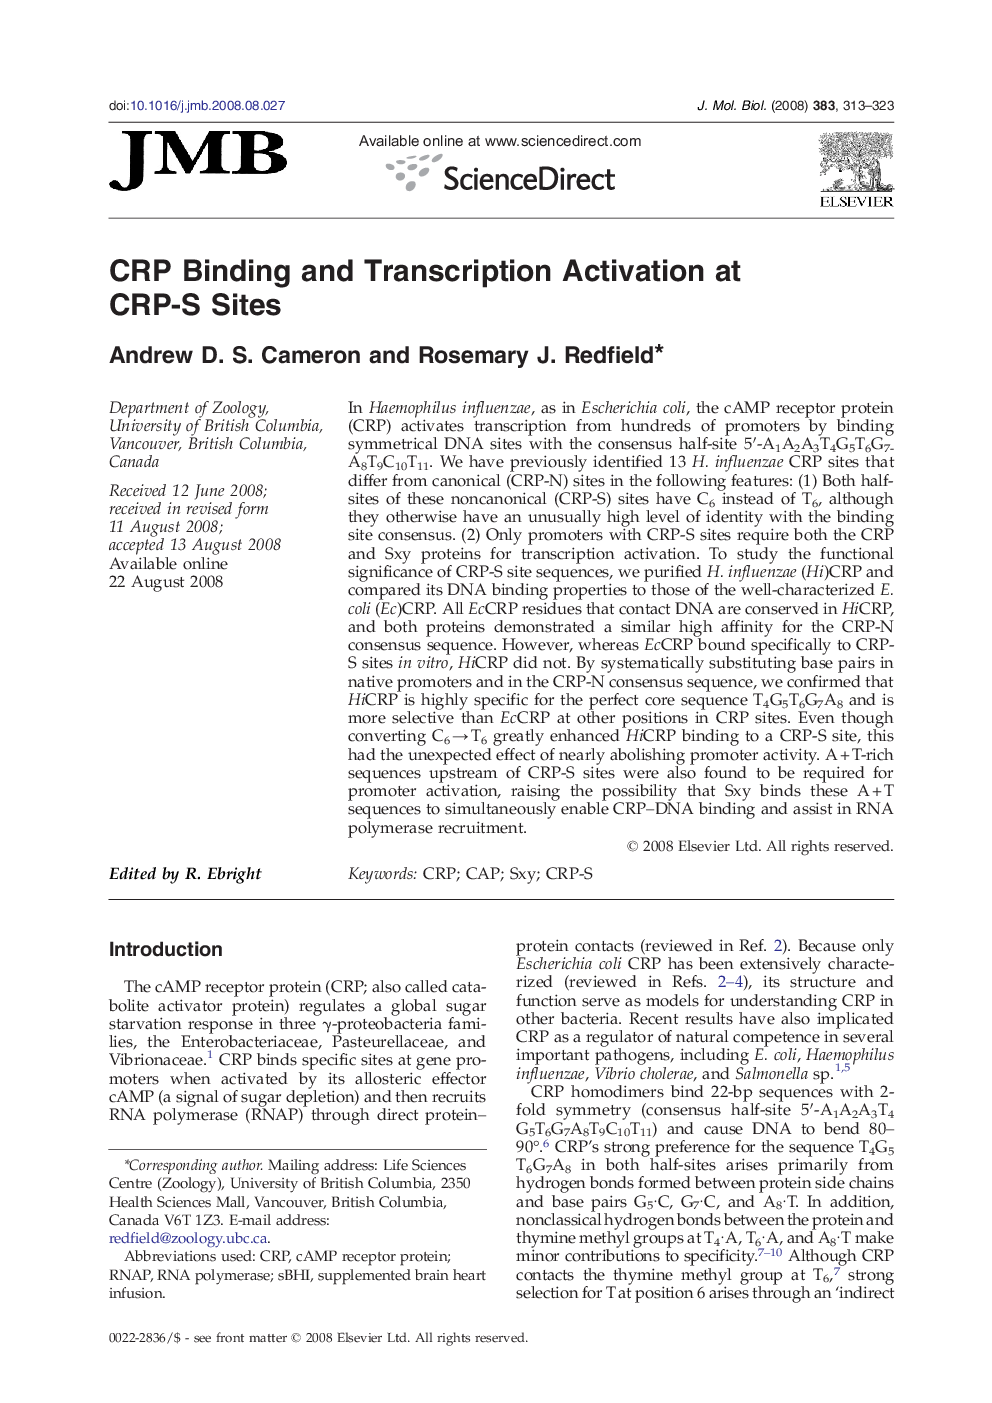 CRP Binding and Transcription Activation at CRP-S Sites